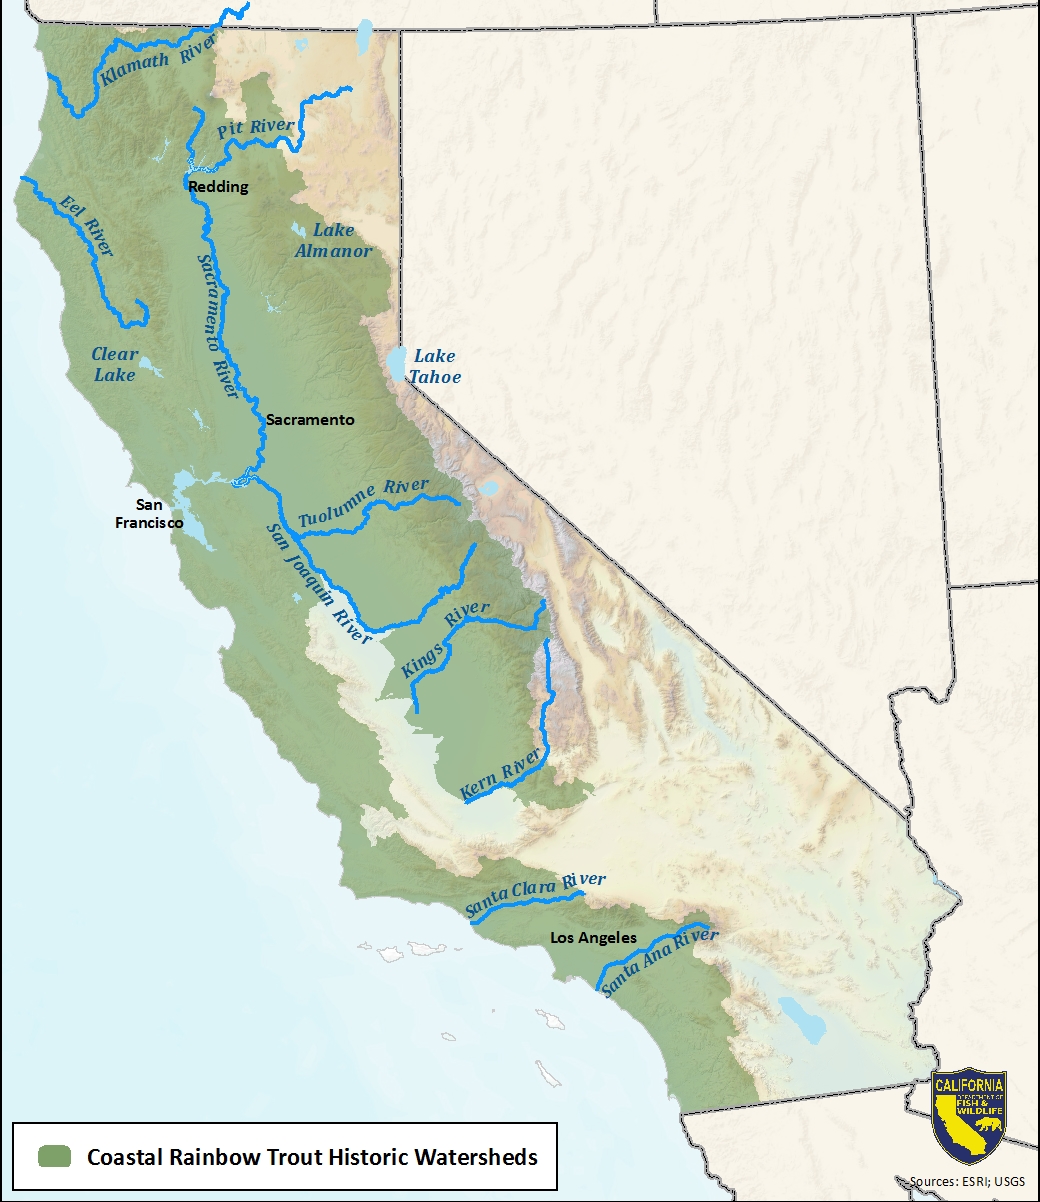 Map of coastal rainbow trout historic watersheds - click to enlarge in new window